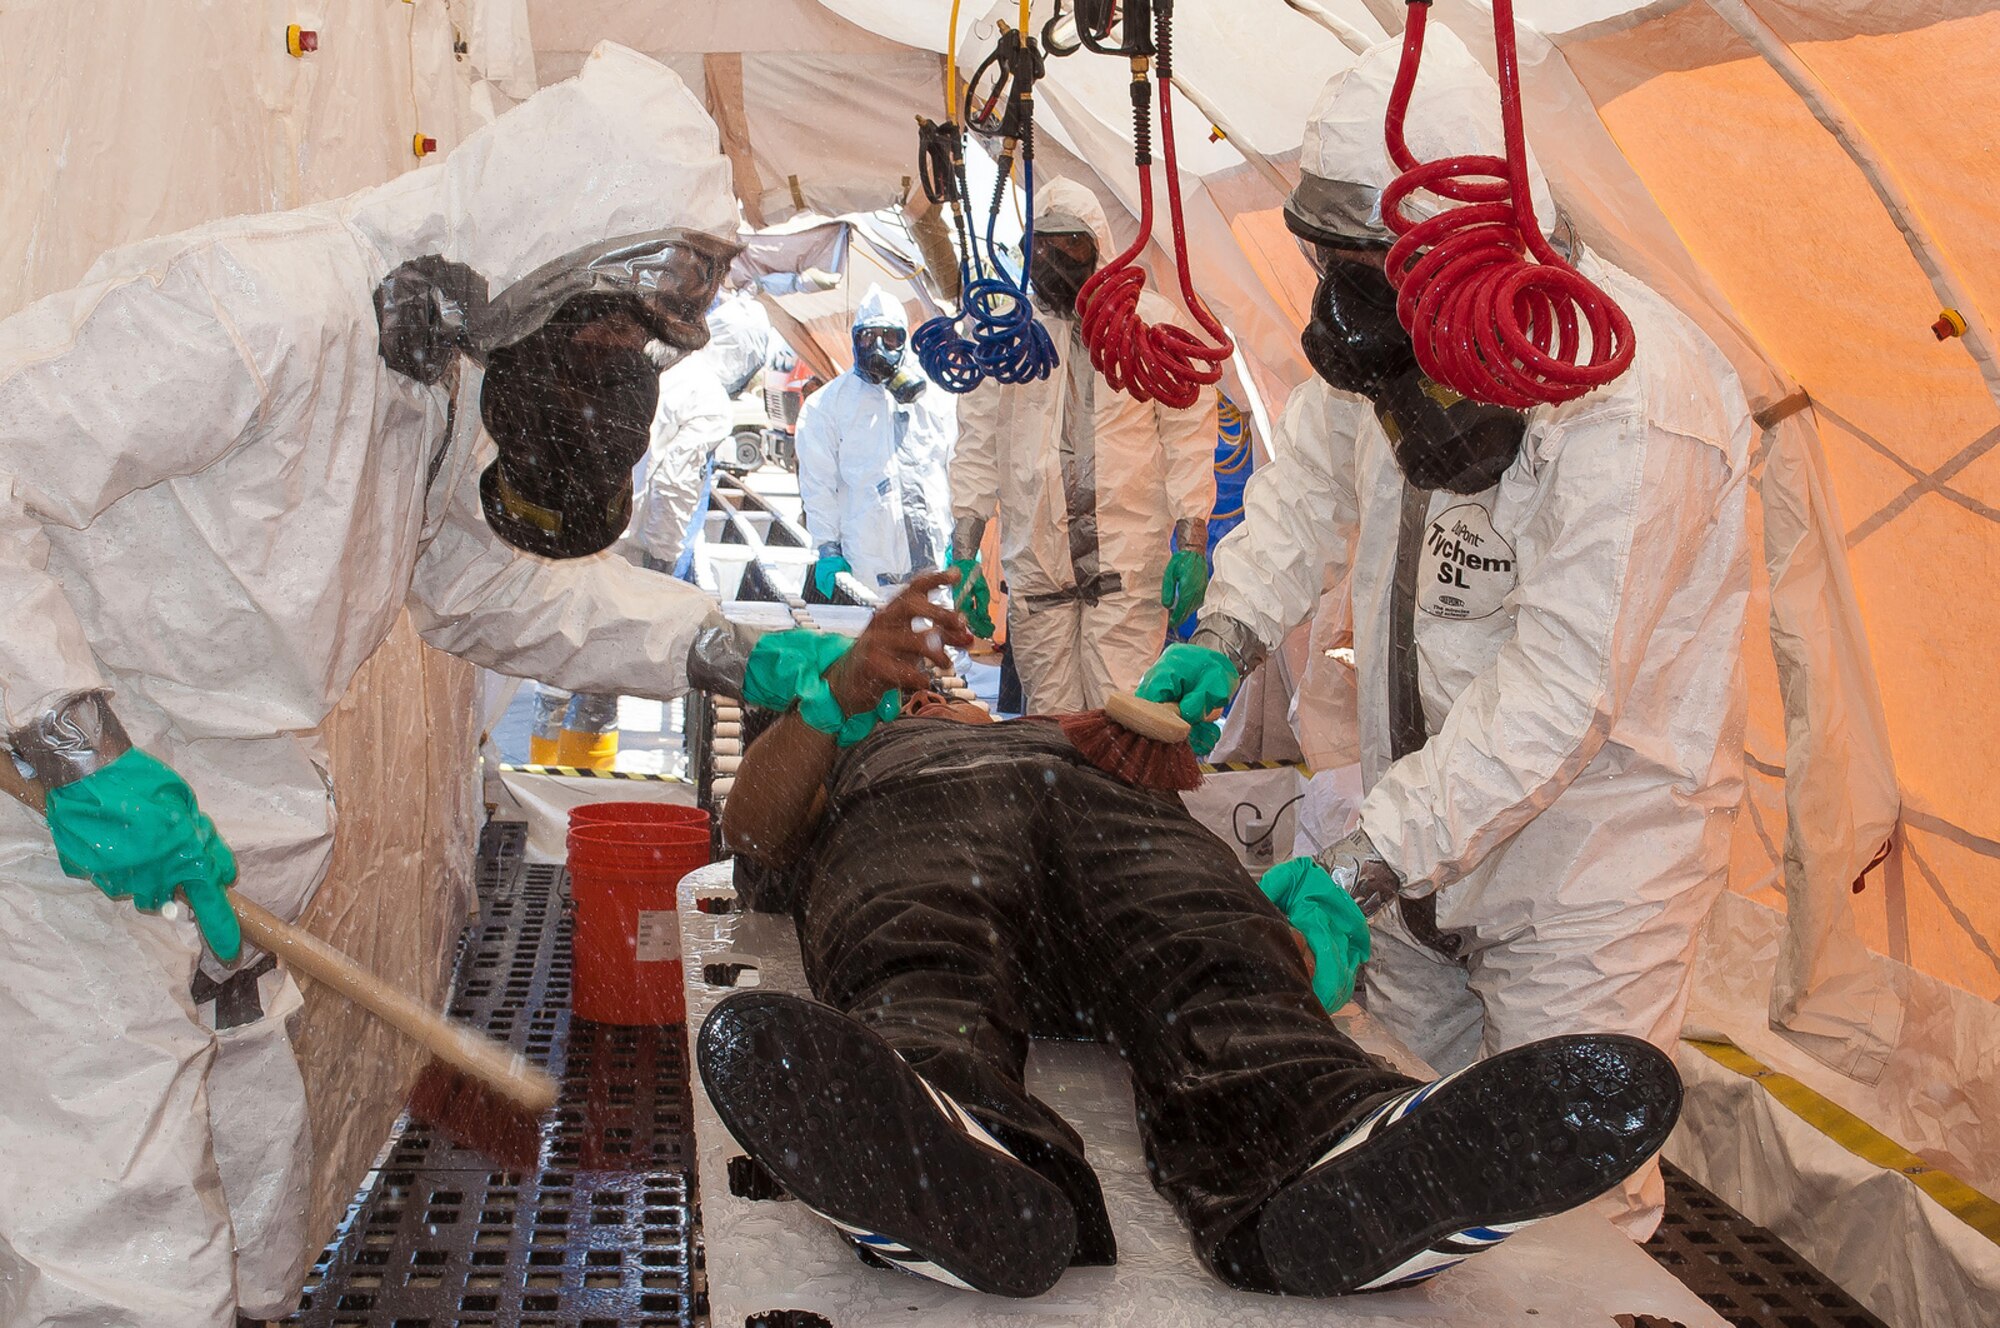 Chemical Support Unit members decontaminate a mock victim during a training exercise observed by Maj. Gen. H. Michael Edwards, the Adjutant General of Colorado, and other Colorado National Guard senior leaders and facilitated by the CONG Chemical, Biological, Radiological, and Nuclear (CBRN) Enhanced Response Force Package (CERFP) team at Maffaq Armor Base, Jordan, May 12, 2014. (Air National Guard photo by Capt. Darin Overstreet)